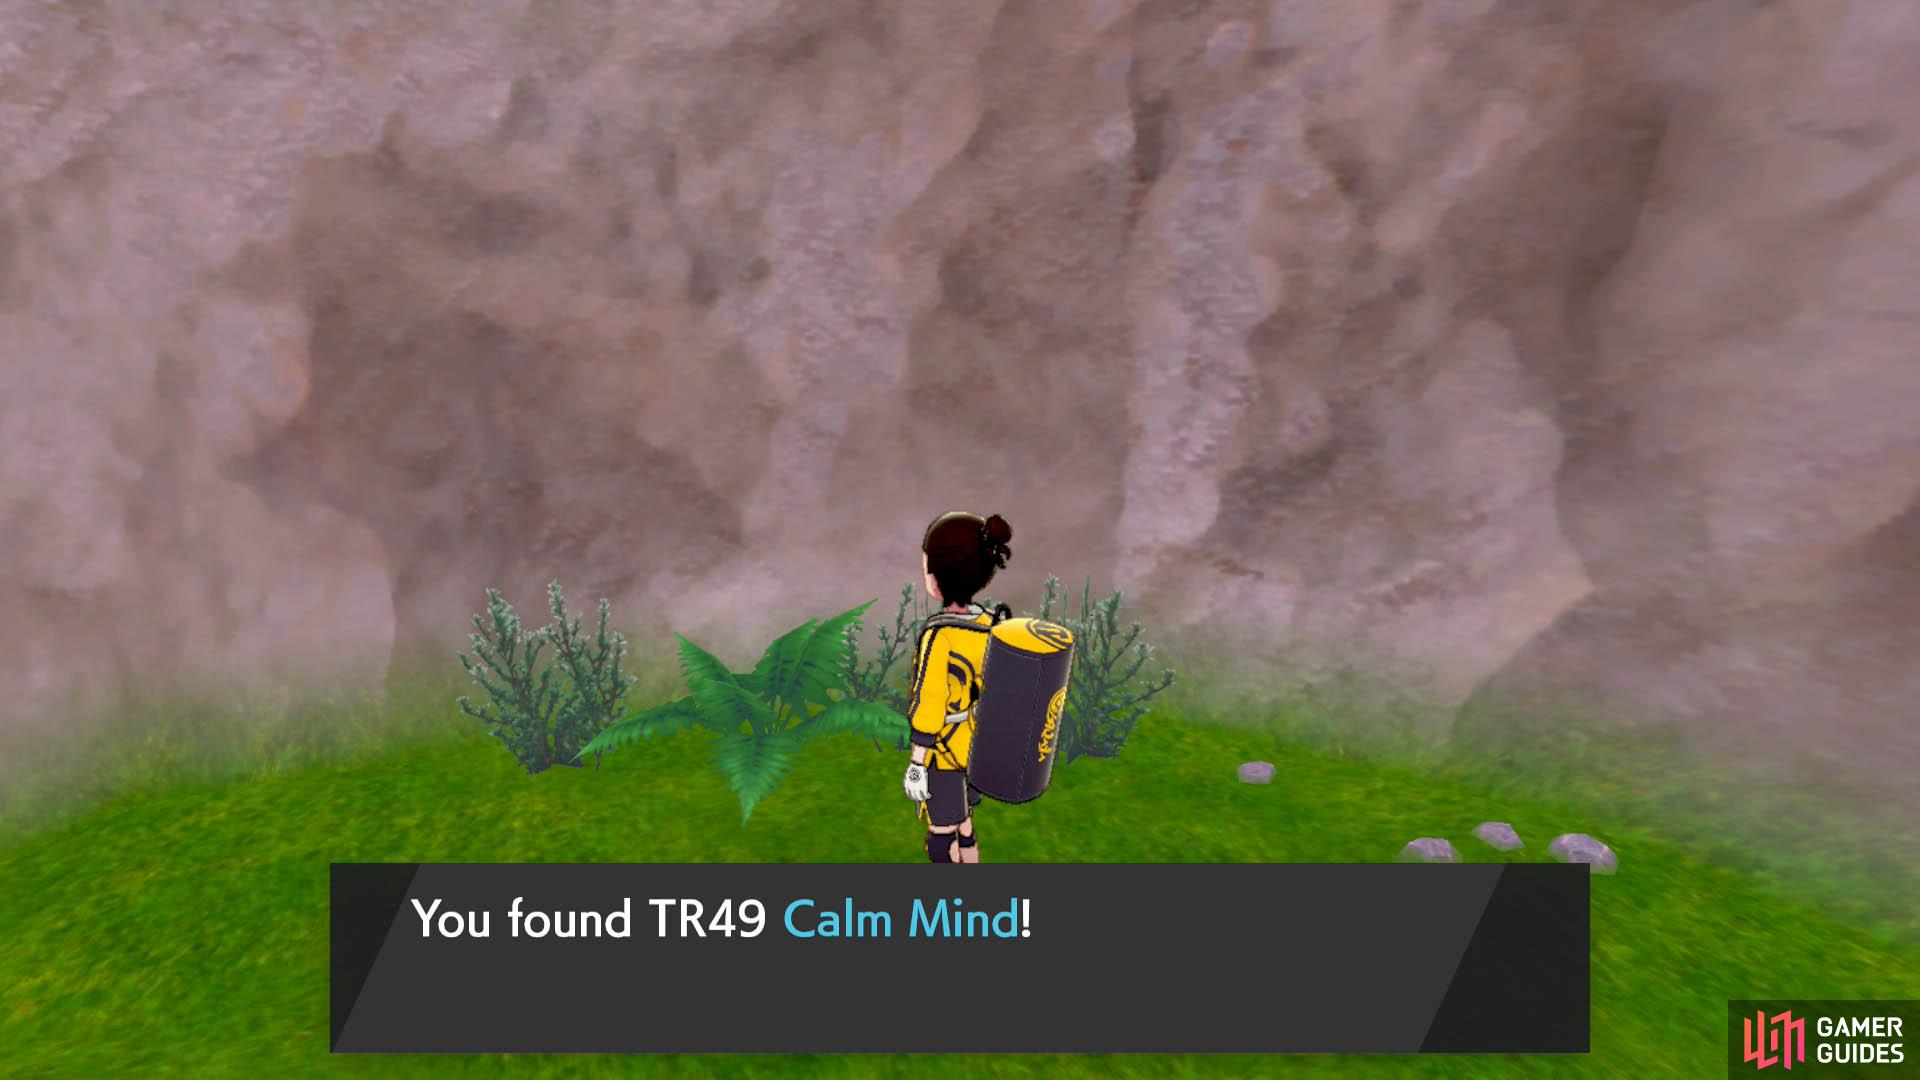 Calm Mind is a potent status move that boosts the user’s Special Attack and Defense stats.